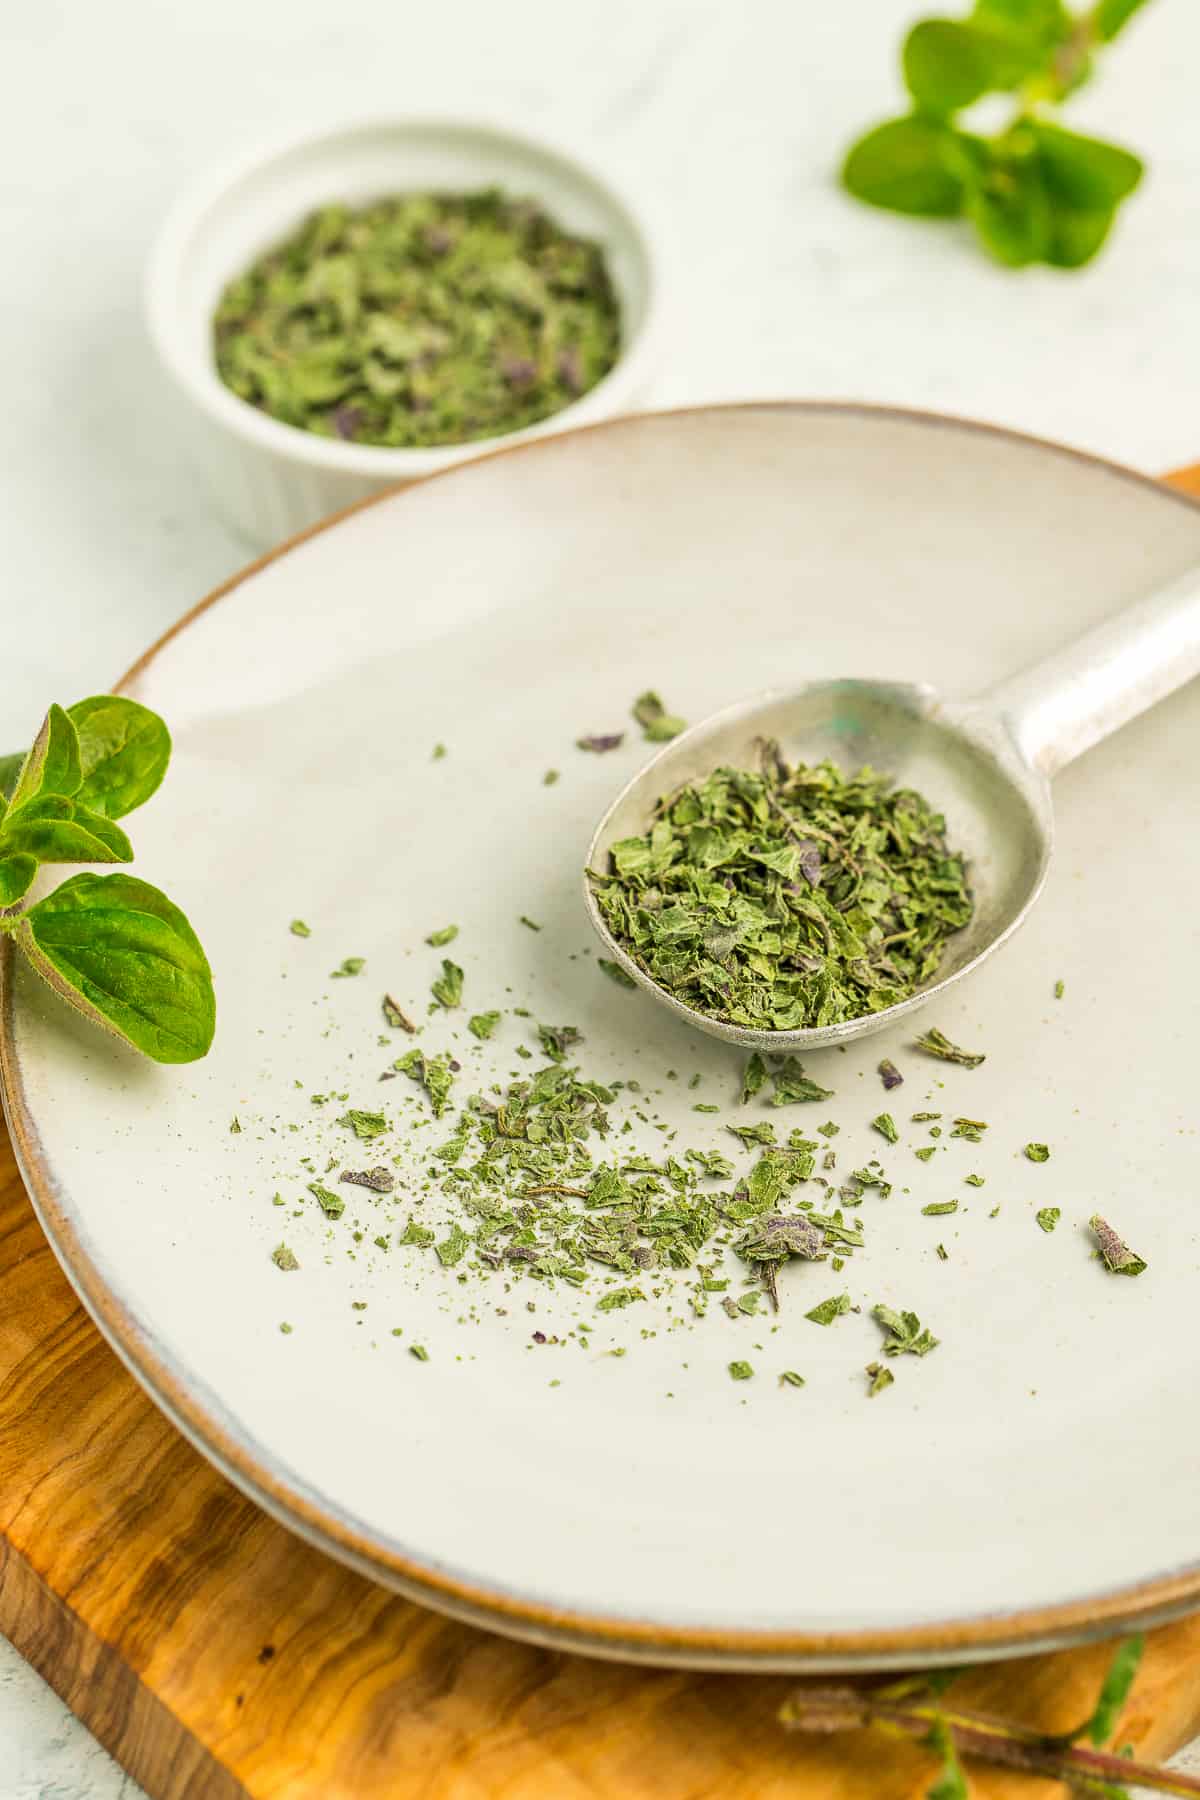 a measuring spoon with dried oregano on a dish.